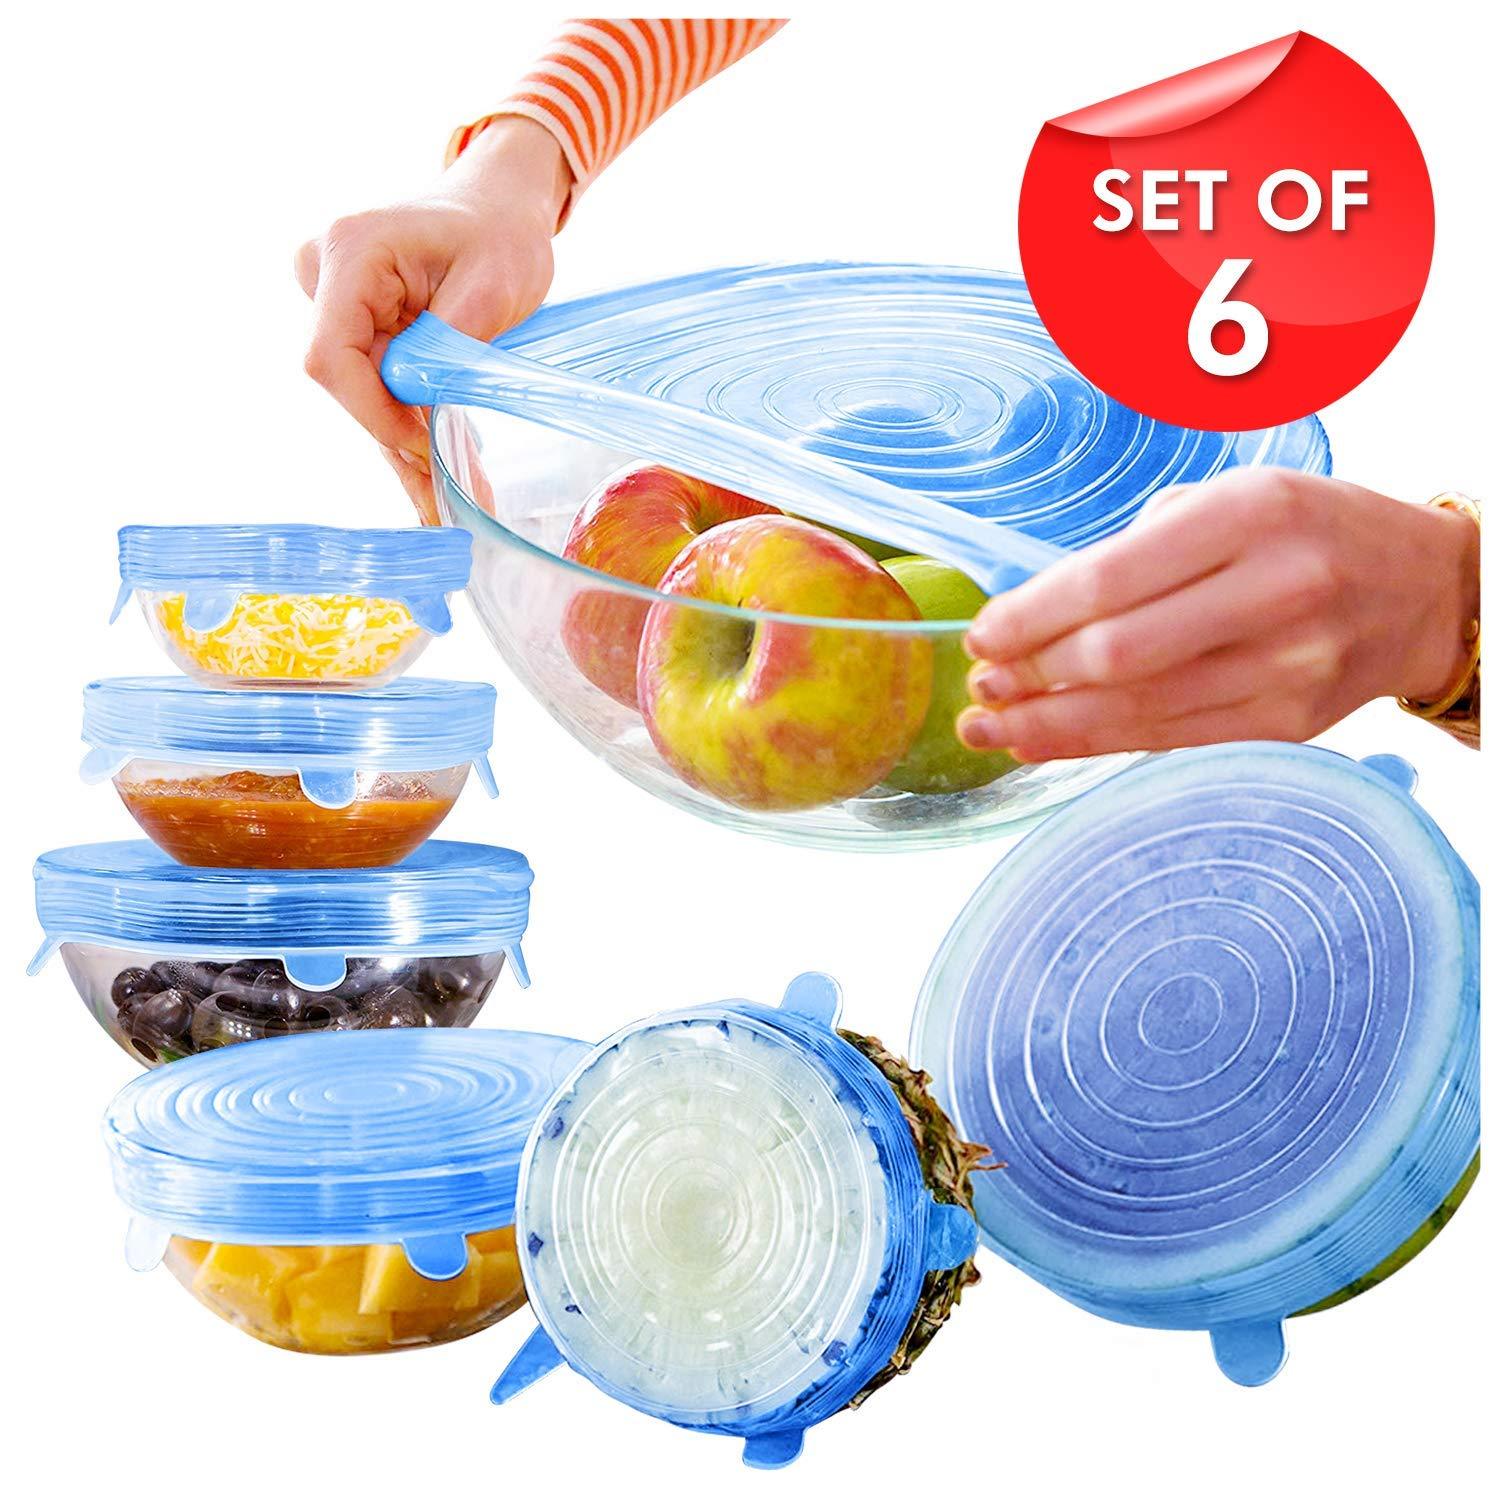 Stretchable Silicone Lid Set for containers (Set of 6)